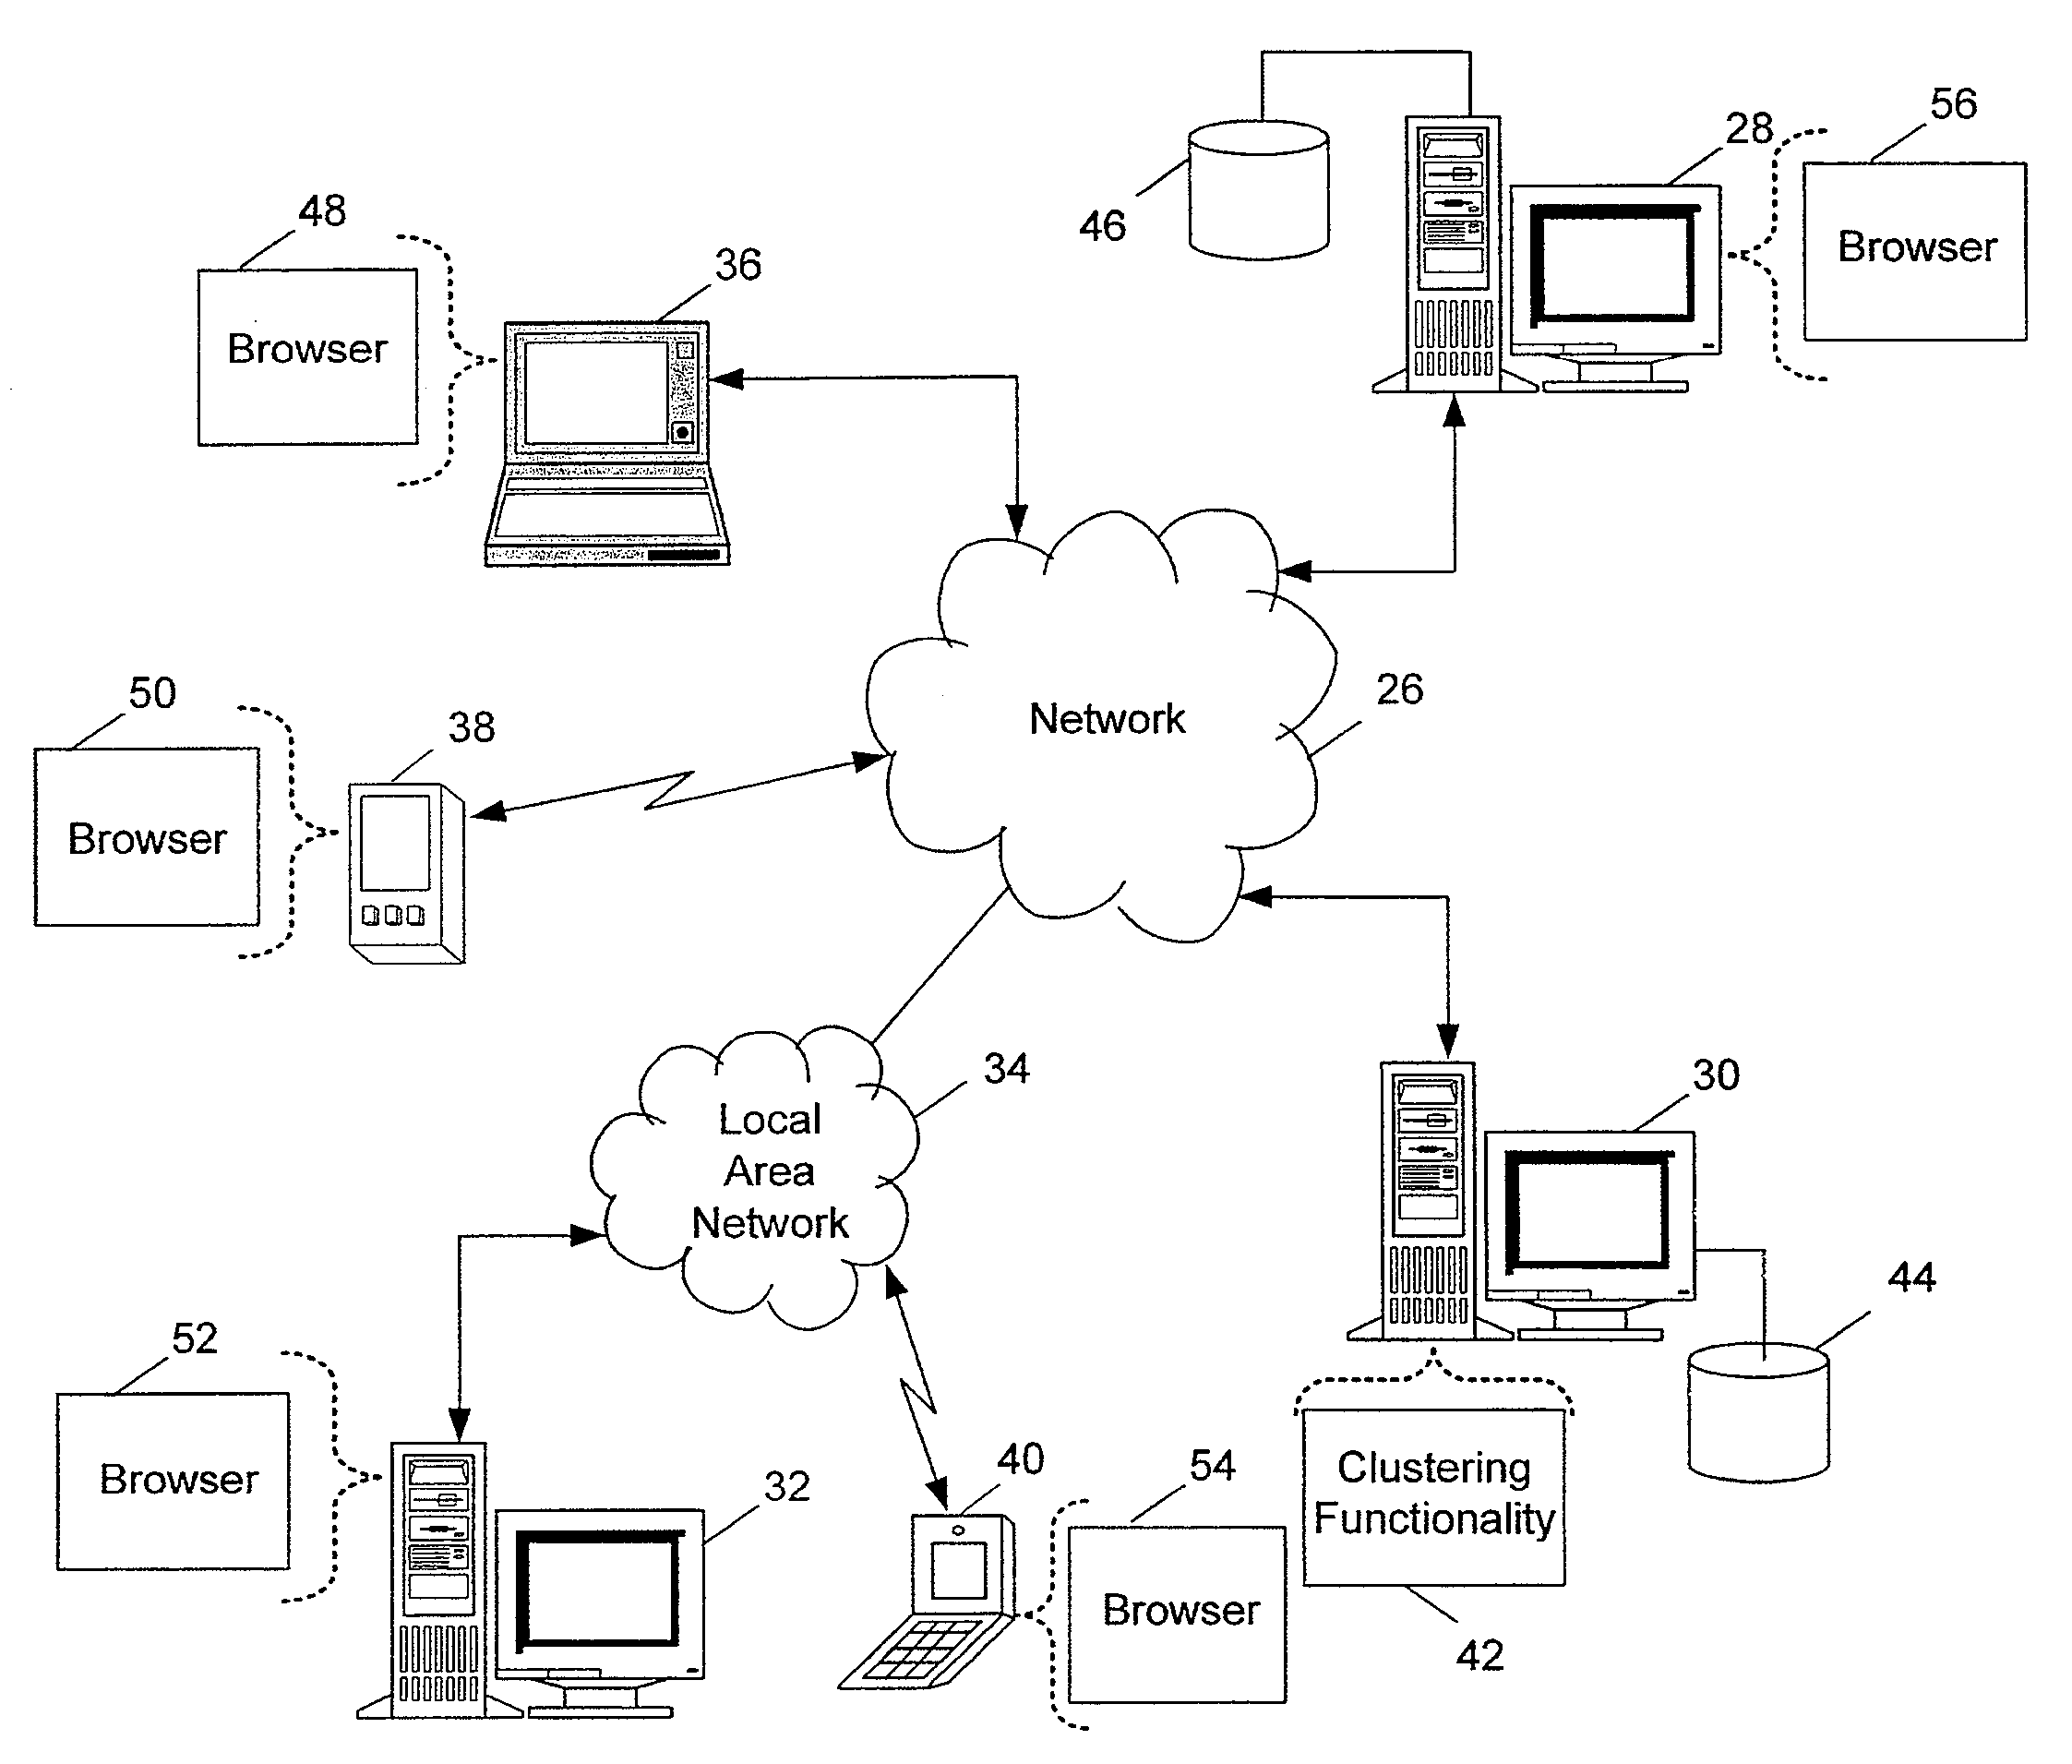 System and Method for Scheduling Meetings